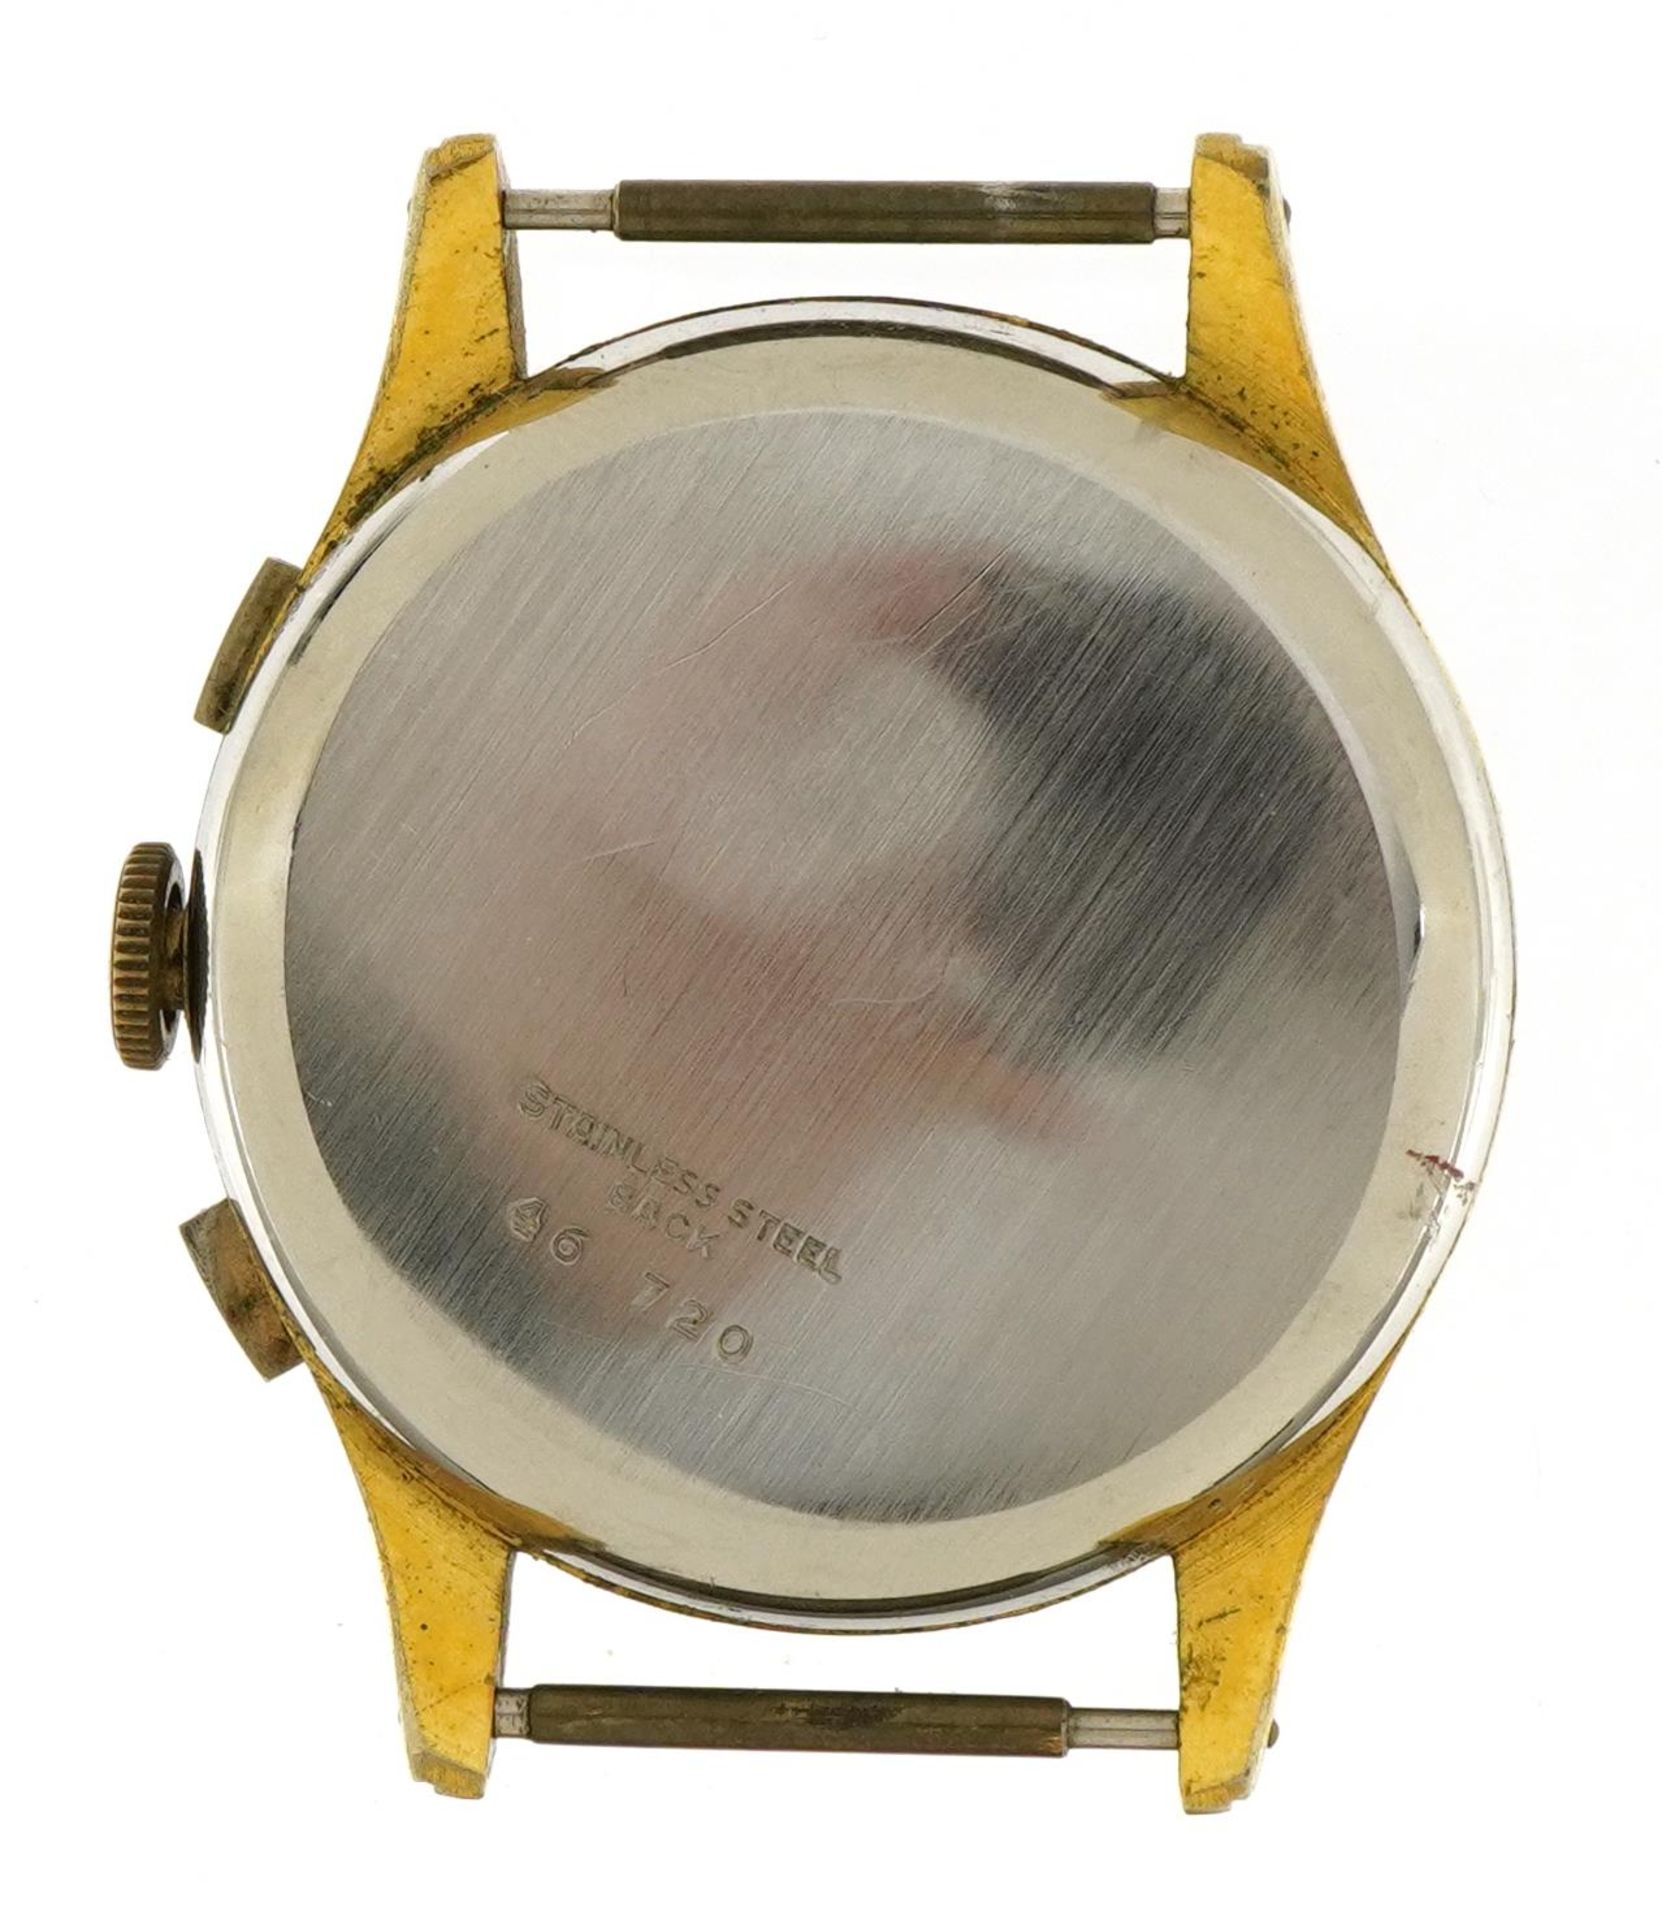 Gentlemen's Suisse chronograph wristwatch, the case numbered 46720, the case 36mm in diameter - Image 2 of 3